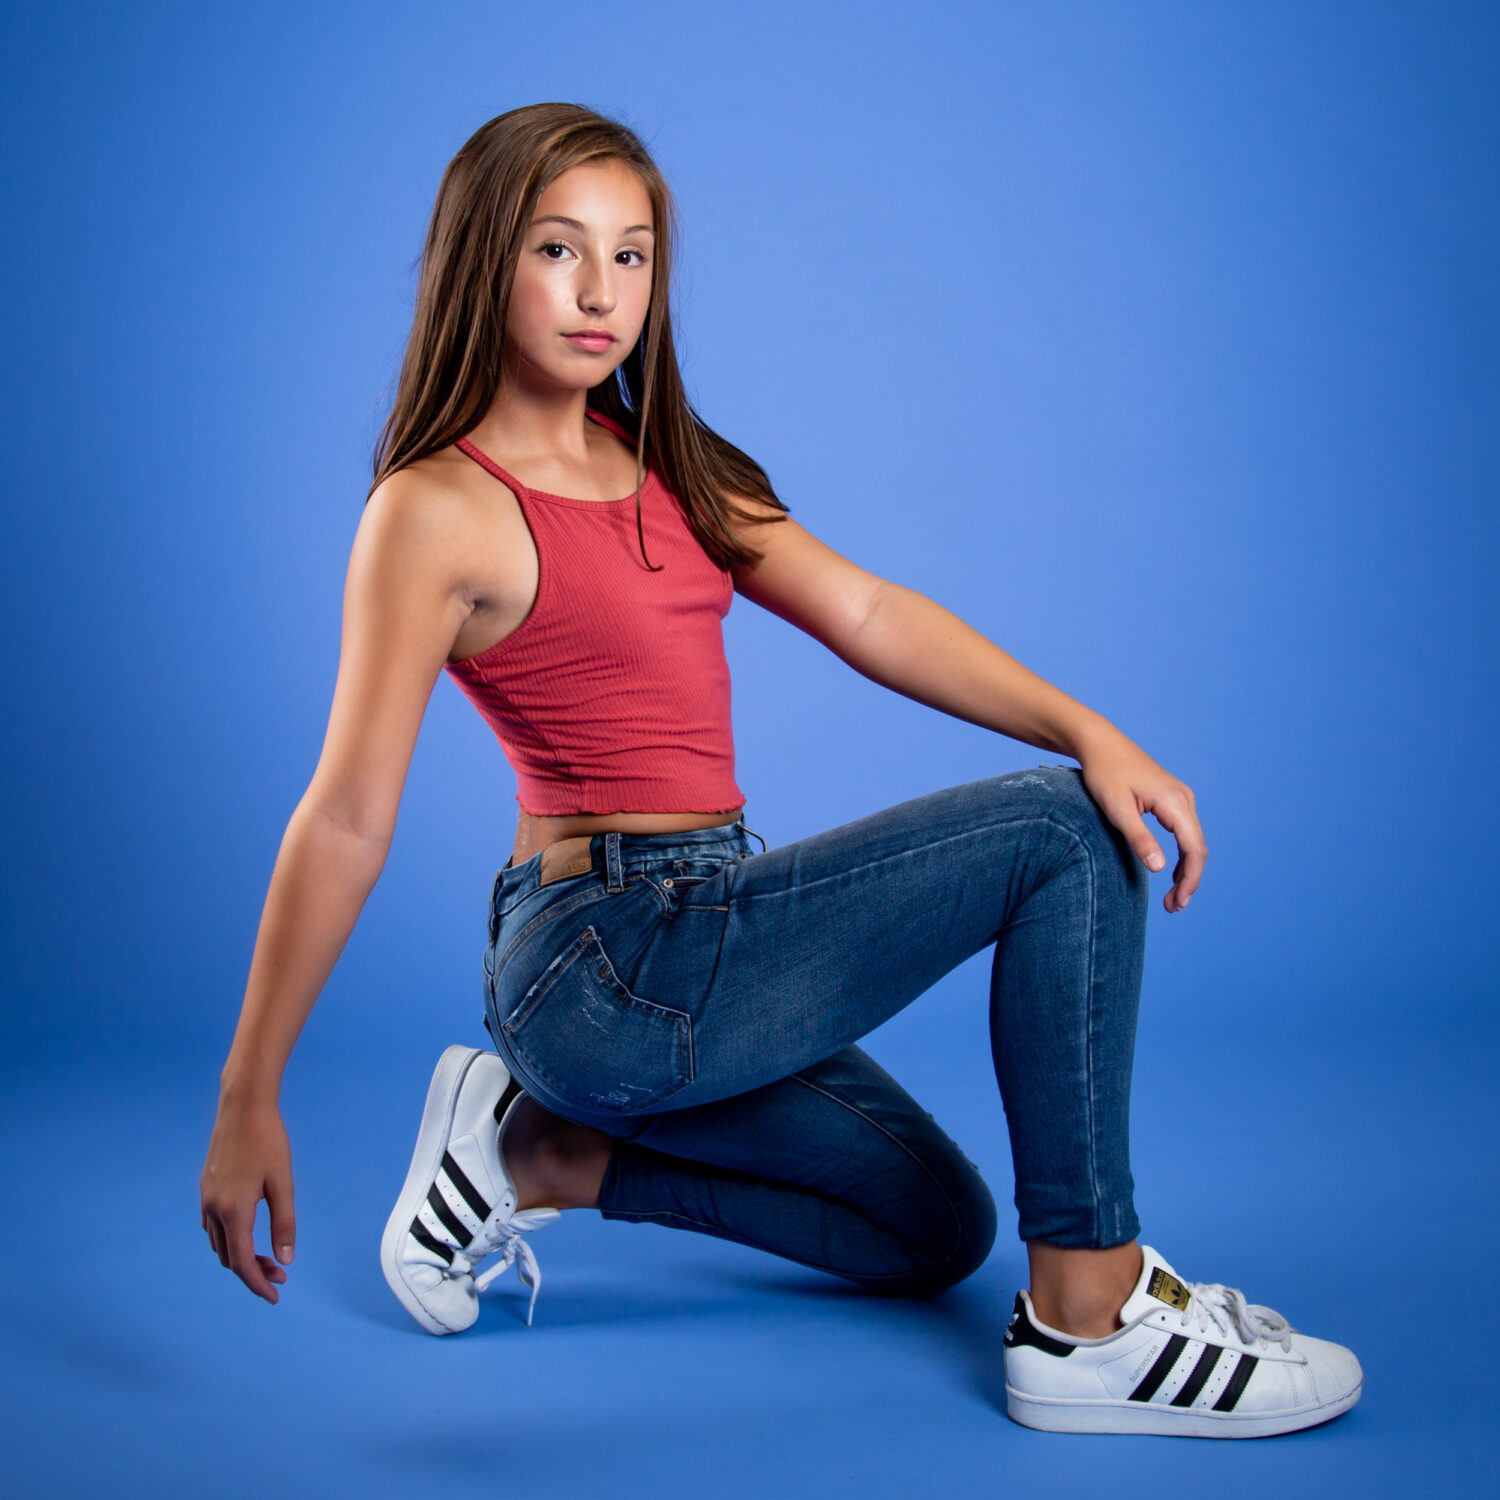 Young Dancer Blue Background